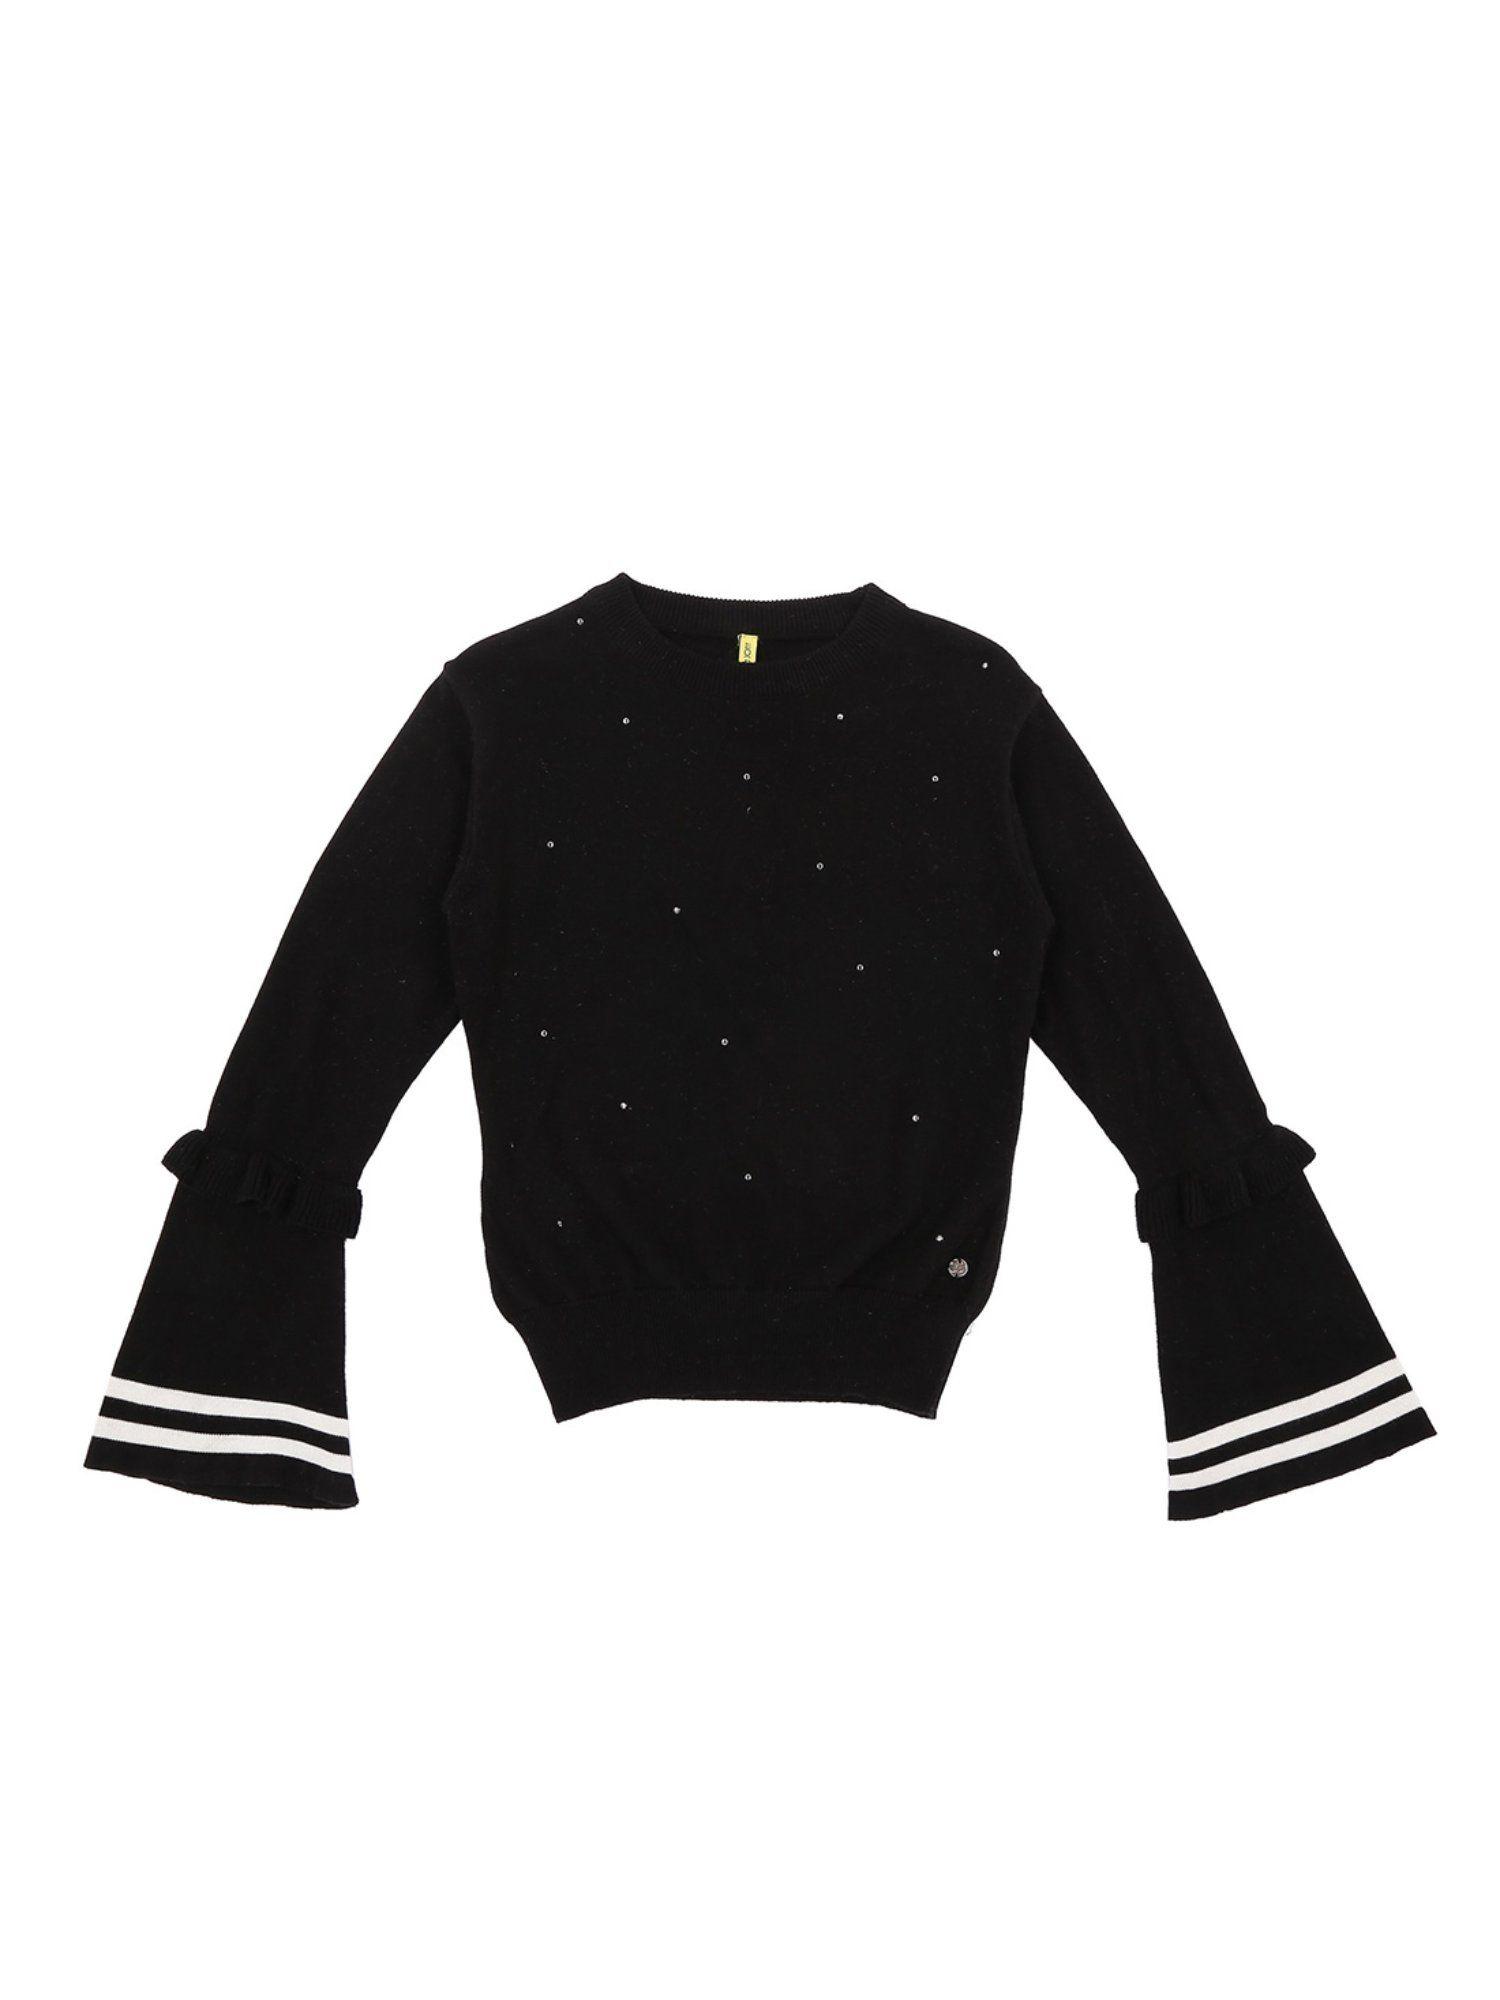 girls black solid cotton sweater full sleeves